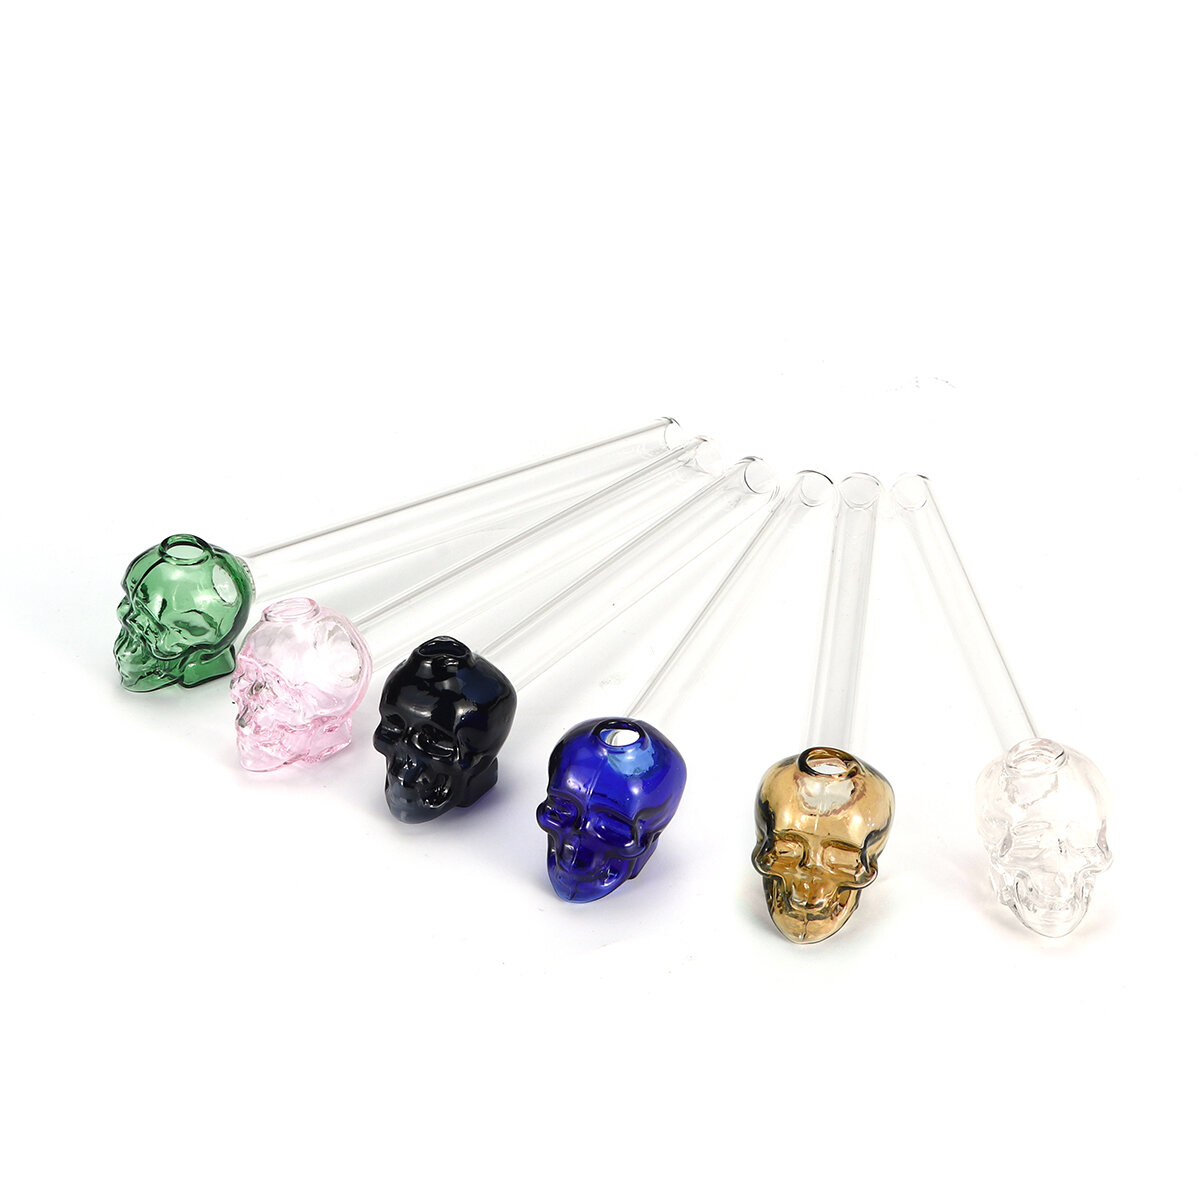 Colorful Skull Glass Water Pipe Modern Design for Smoking Durable